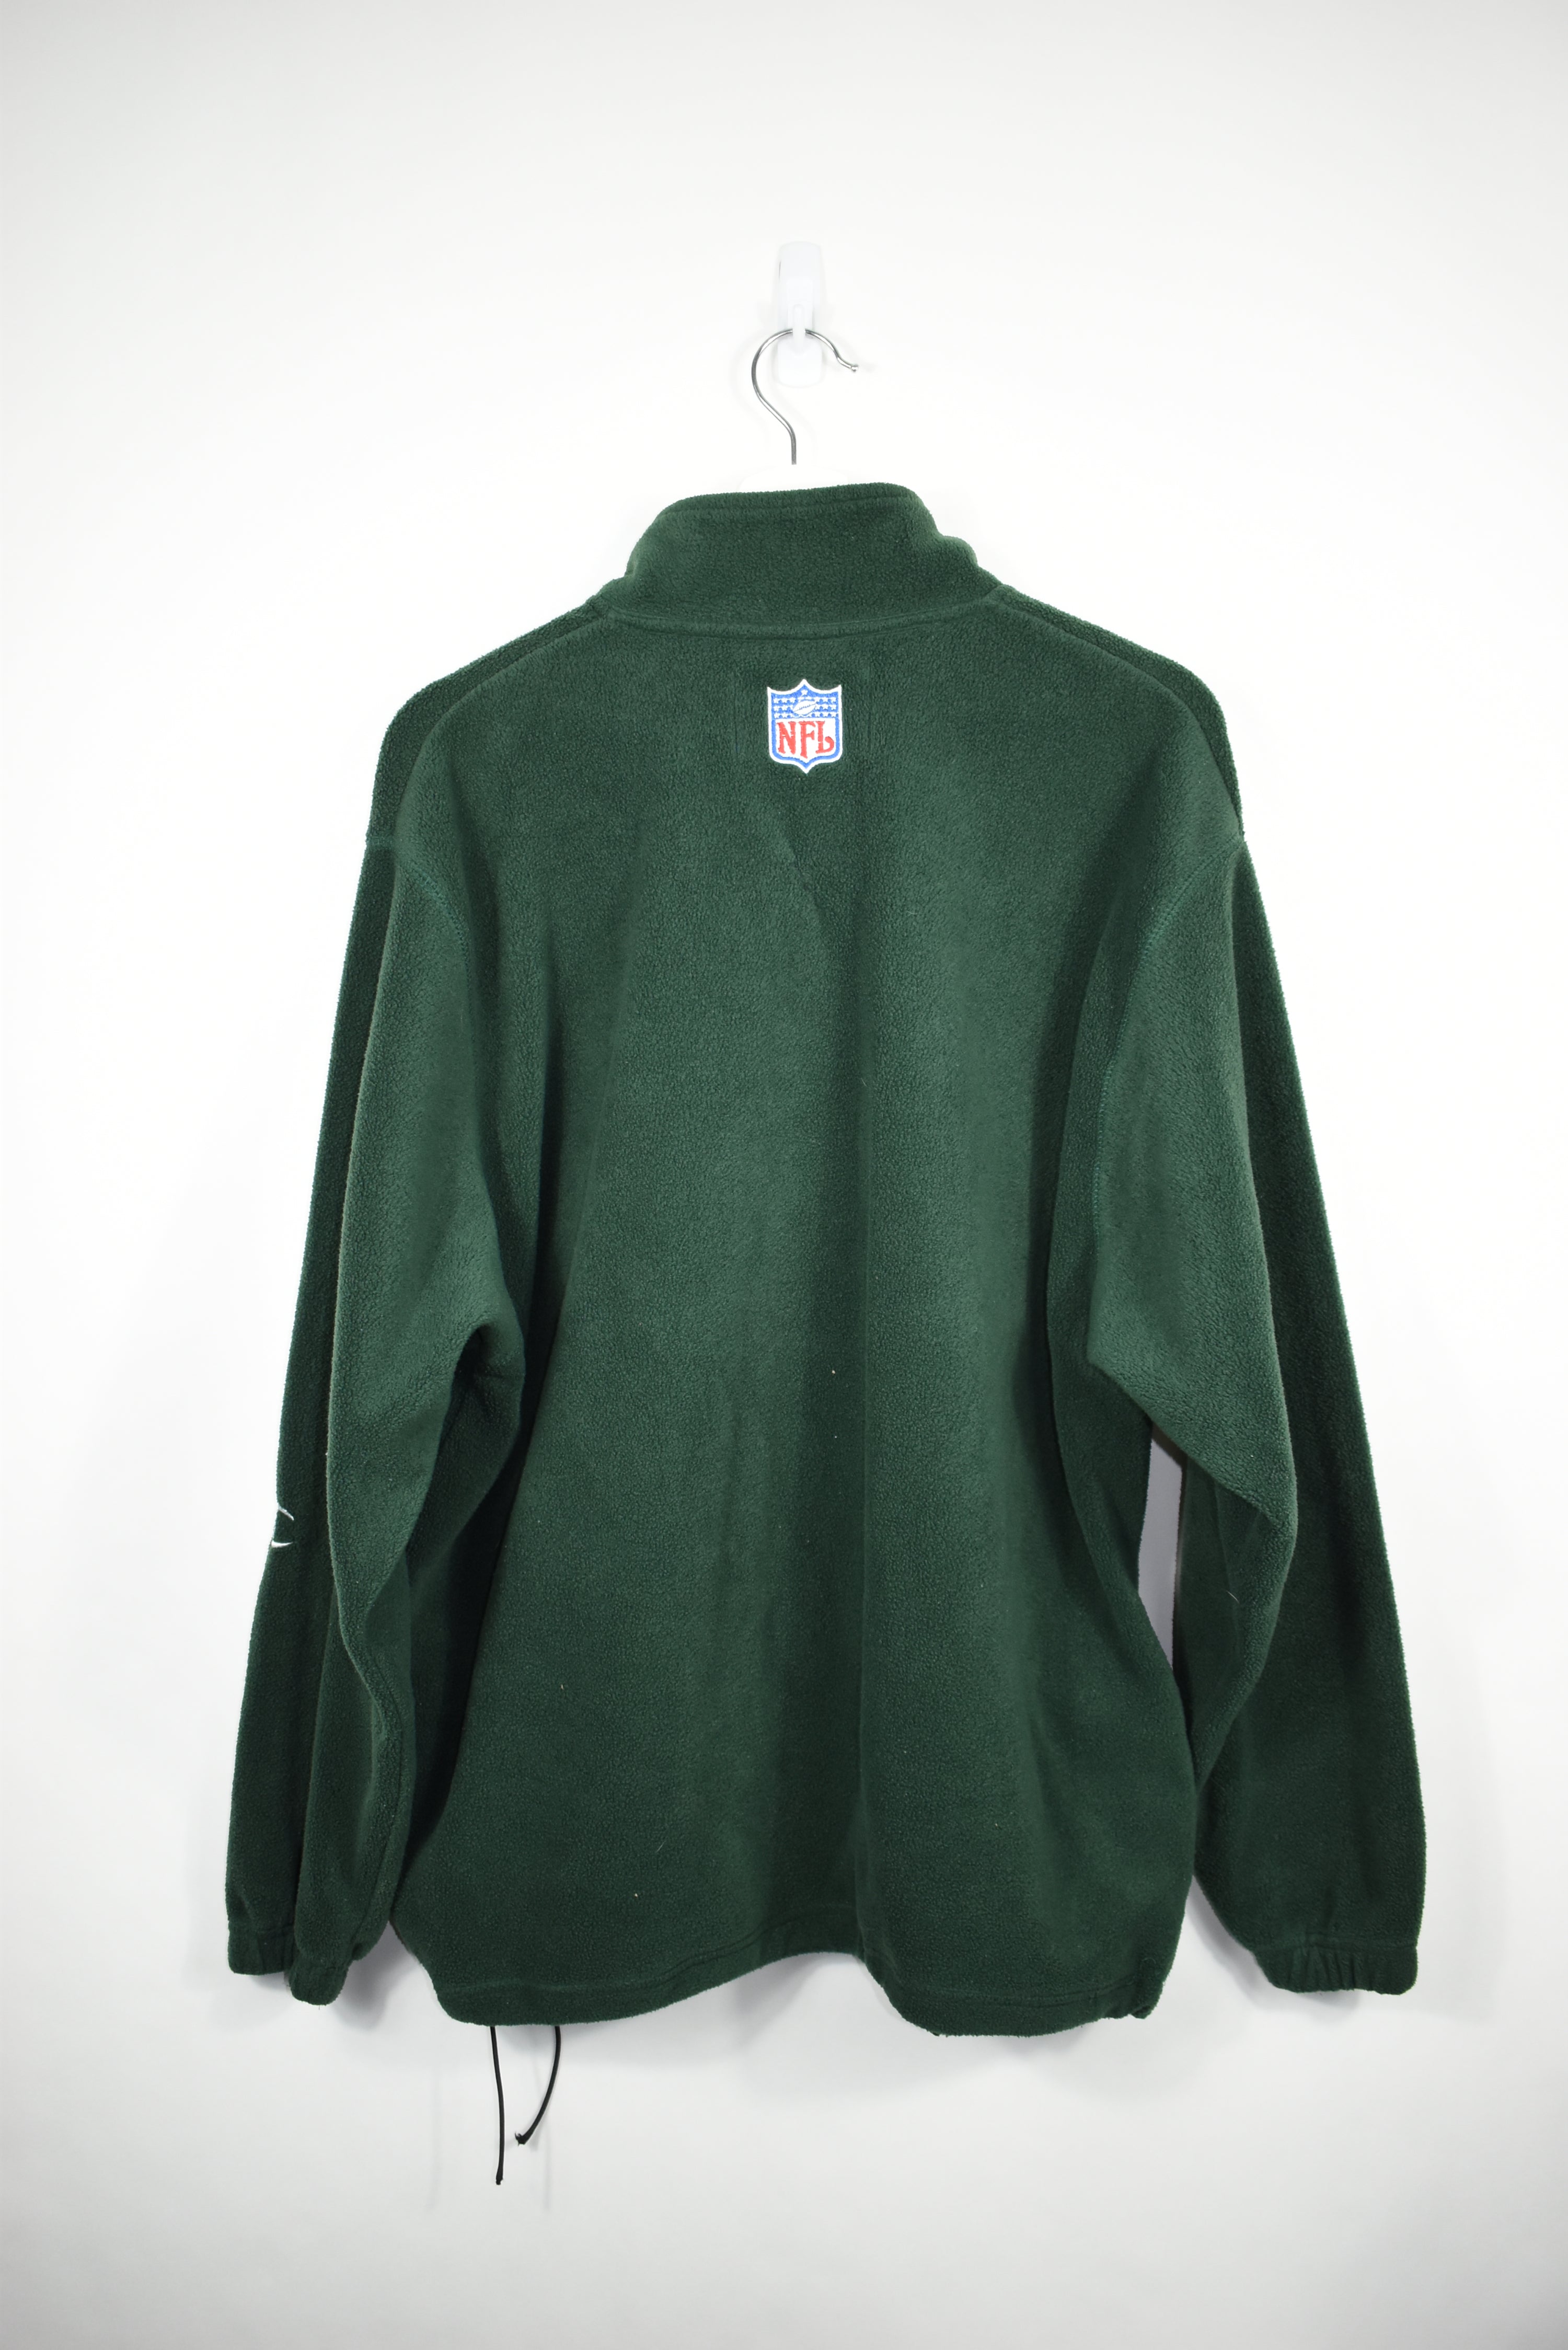 Vintage Champion Green Bay Packers Spellout Embroidered Fleece Large (Baggy)